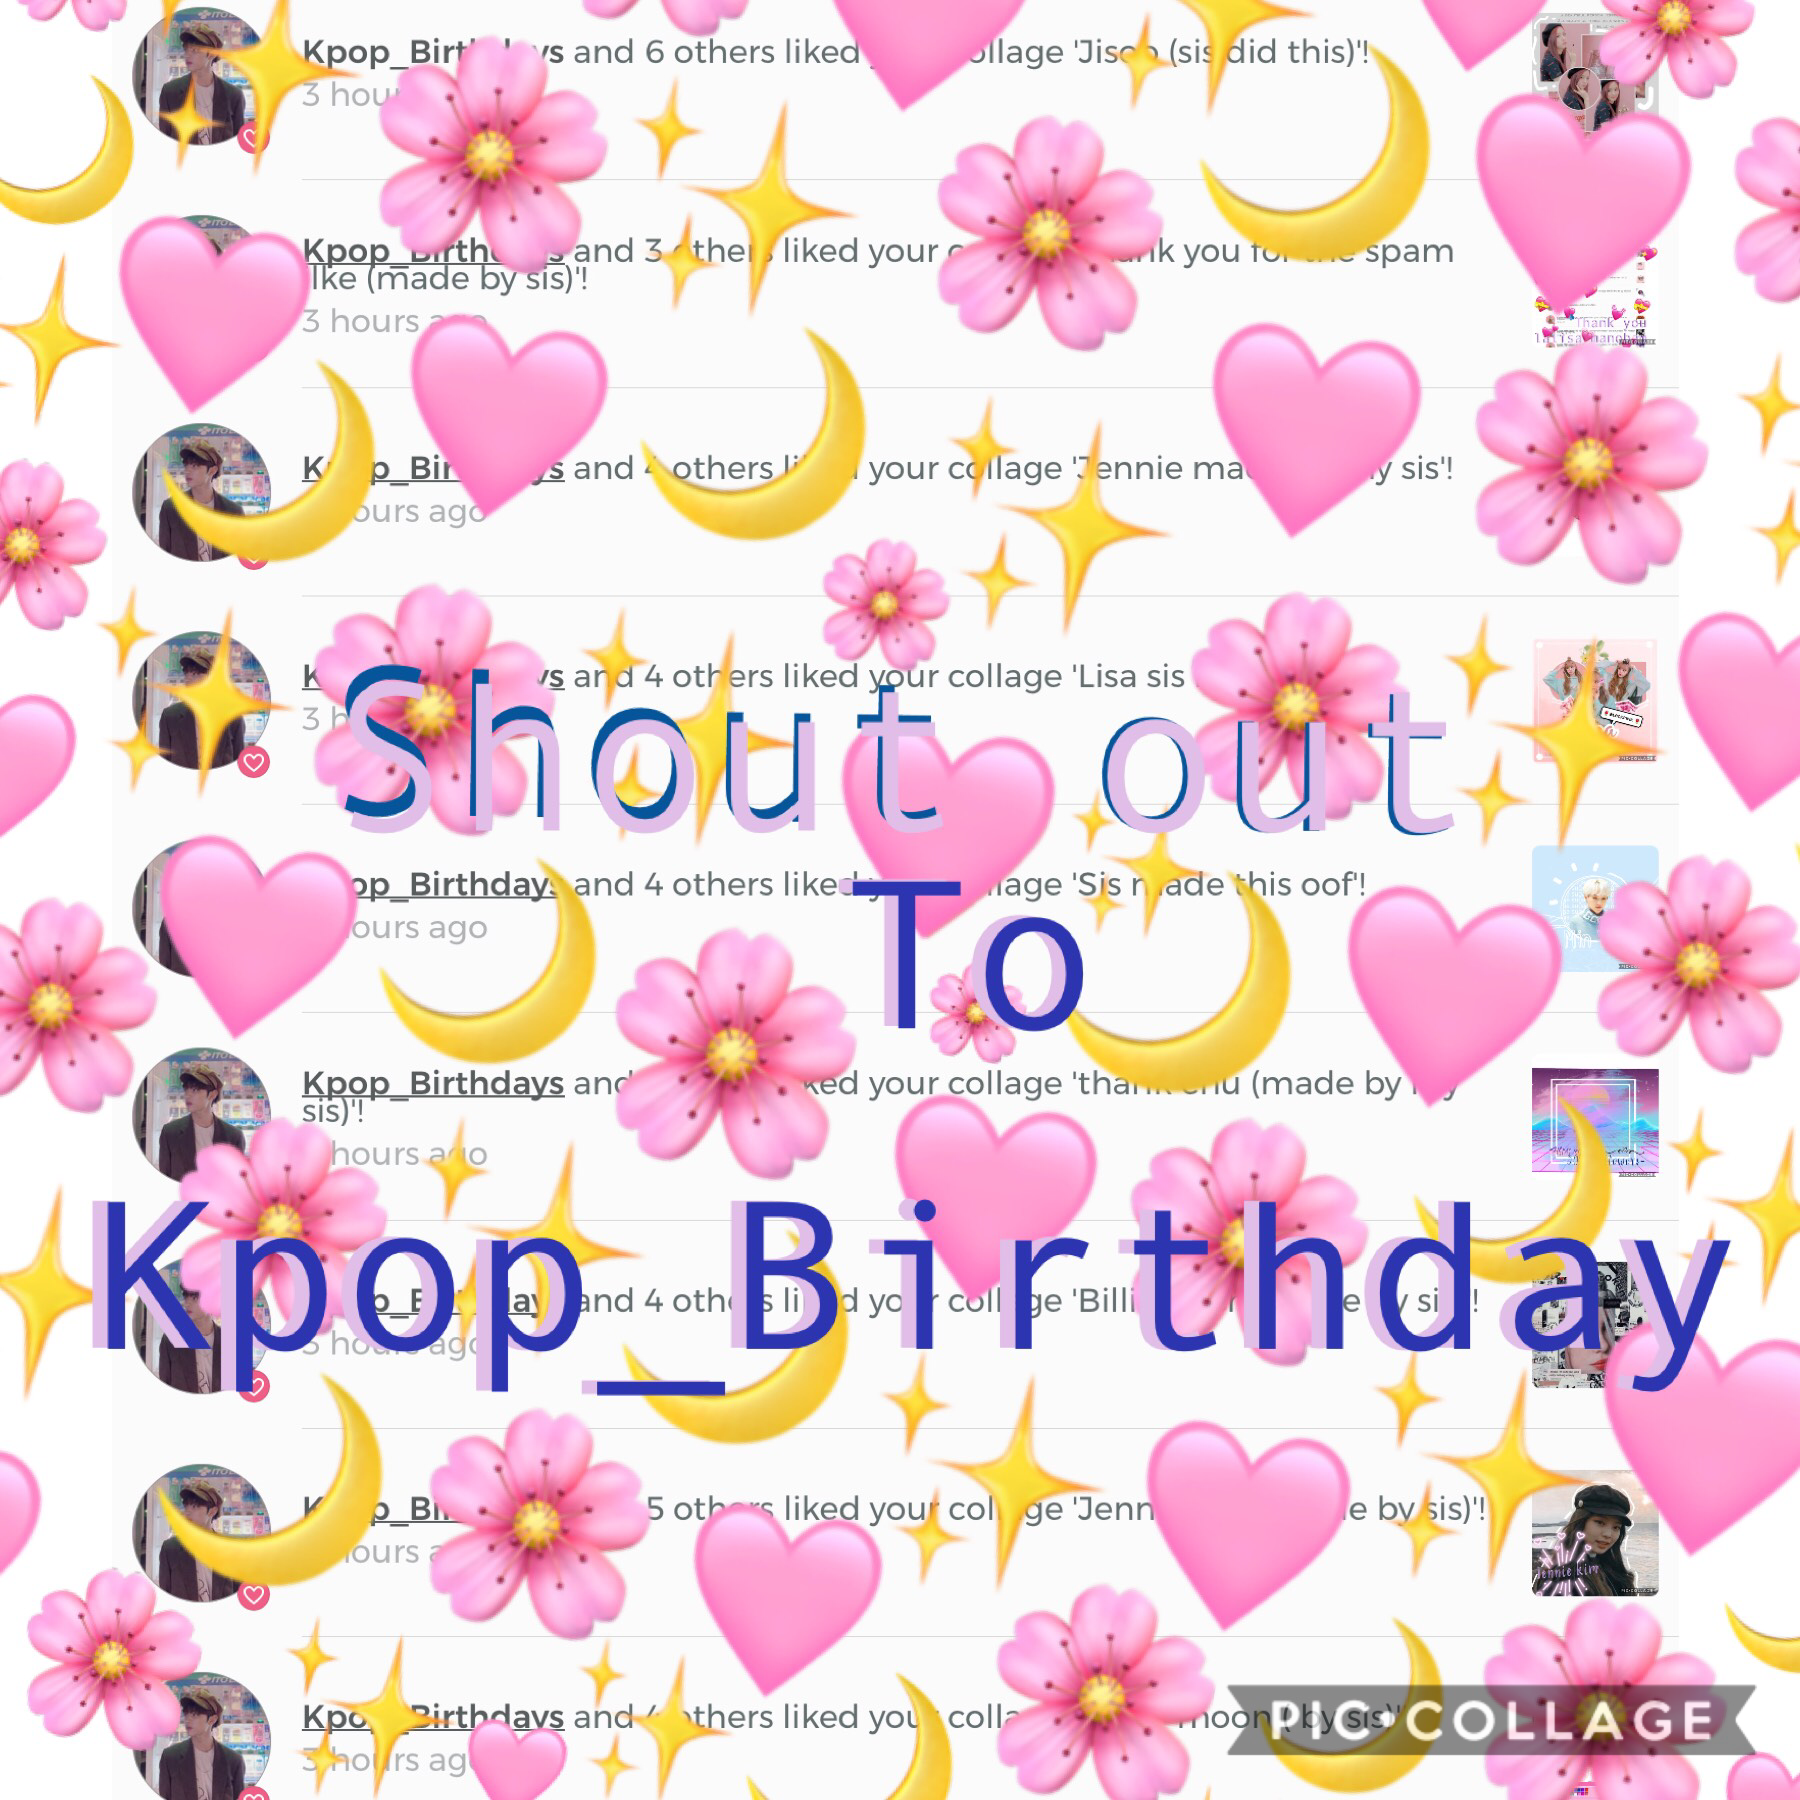 Shout out to Kpop_Birthday